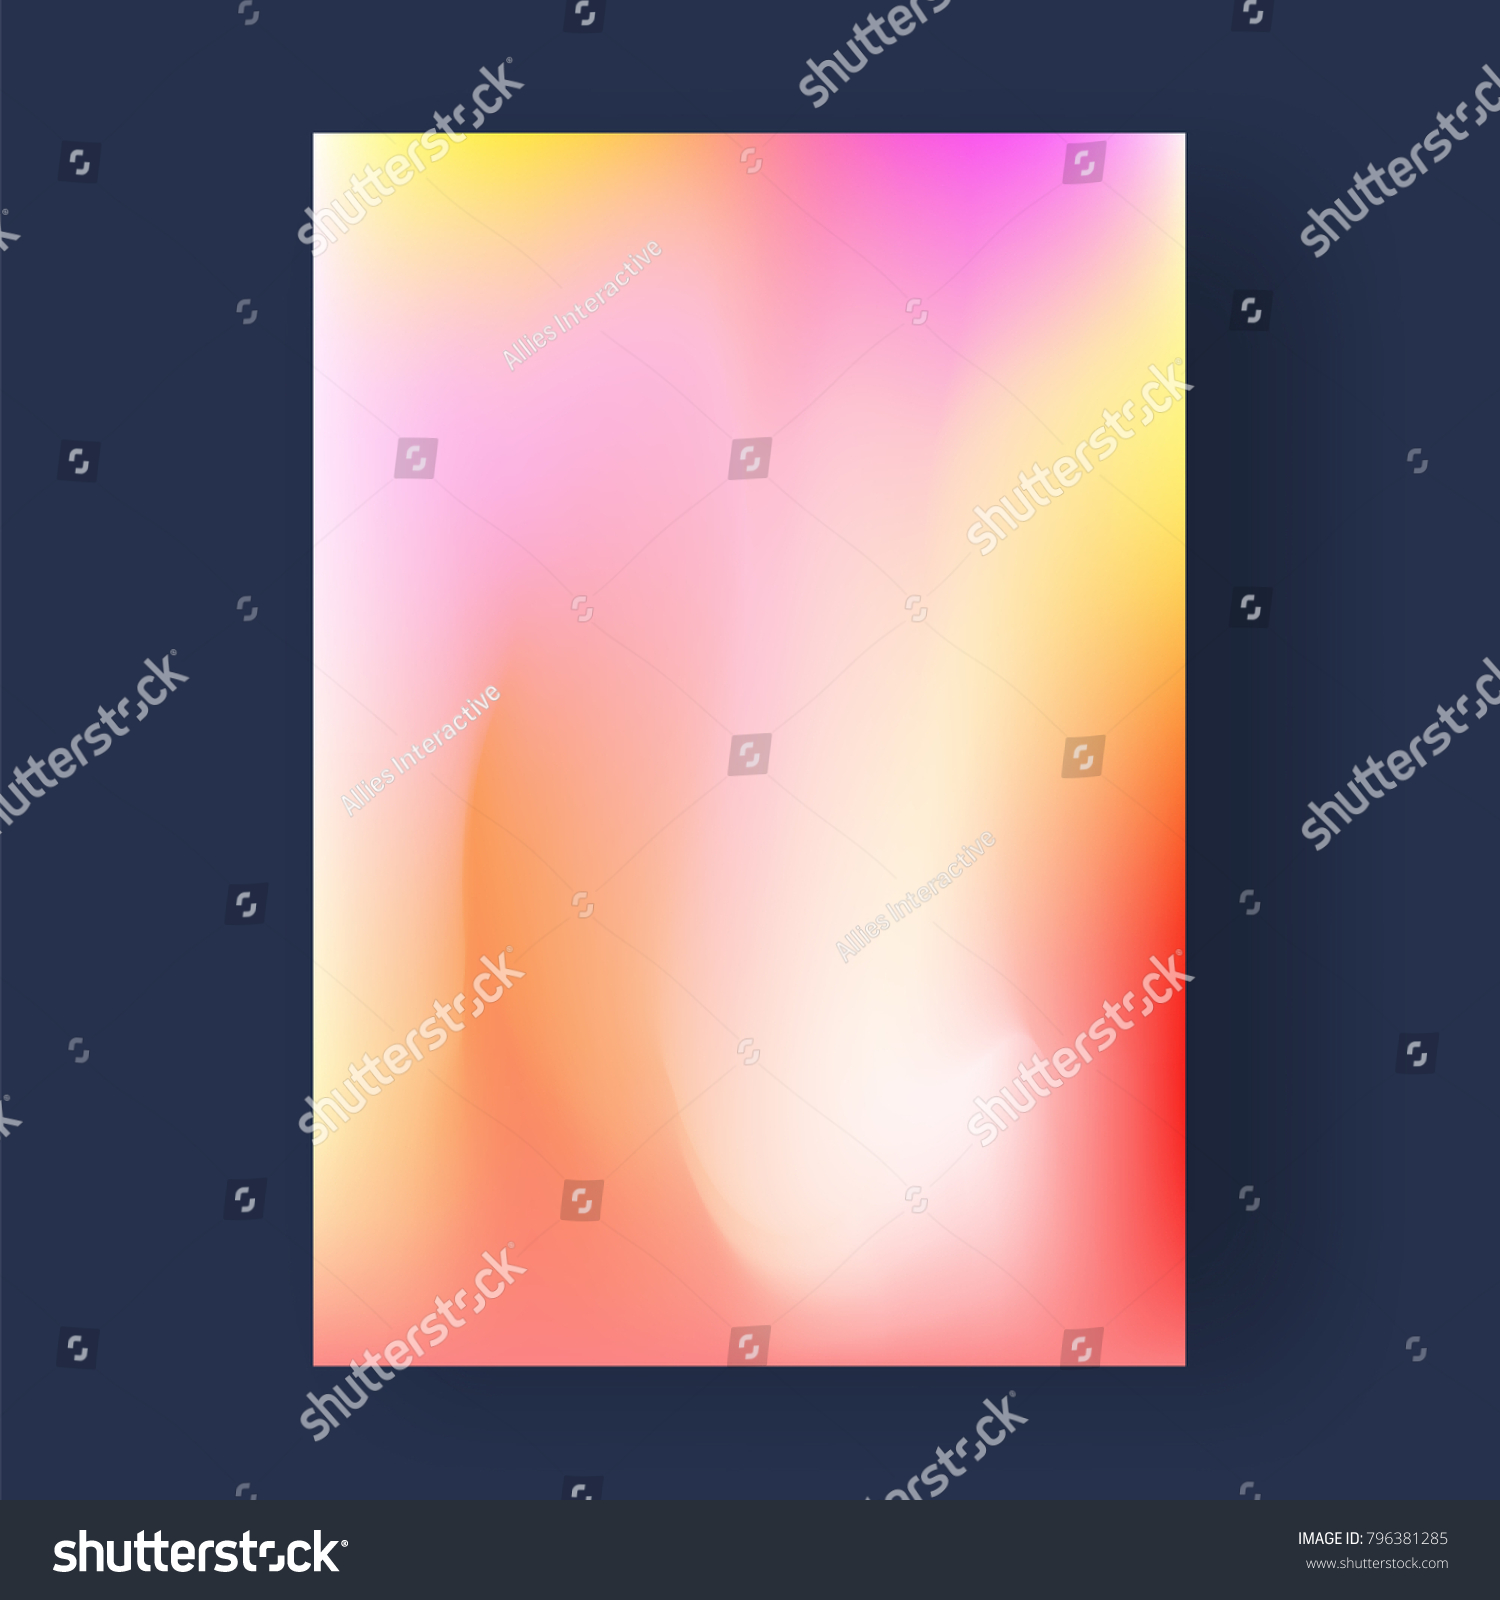 Bright color abstract pattern background, gradient texture for minimal dynamic cover design. #796381285